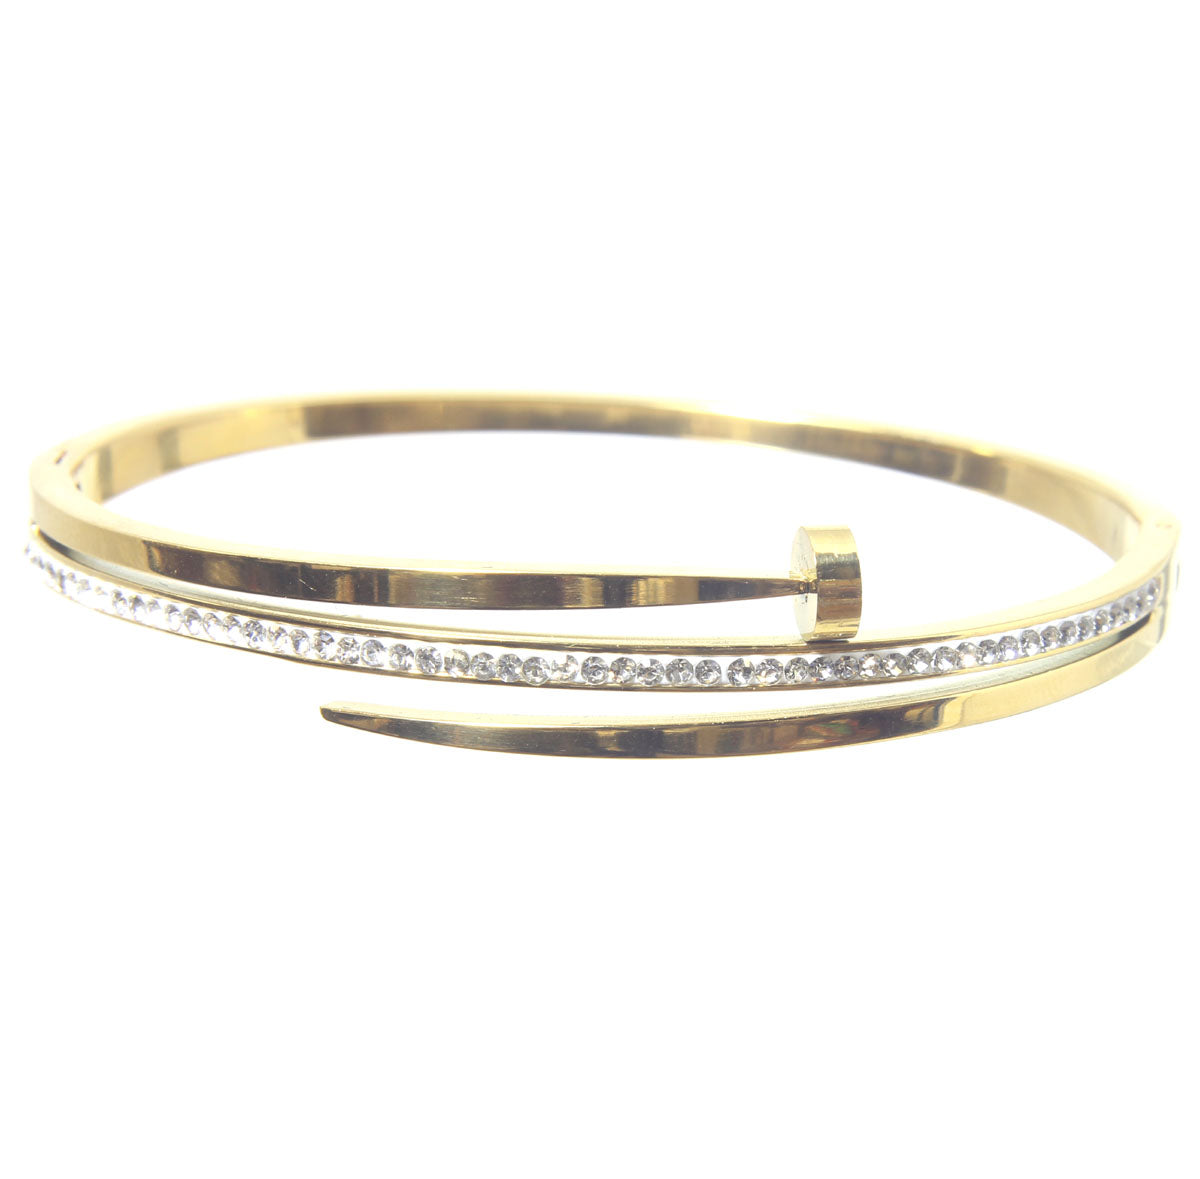 Bangle Bracelet, Gold or Silver, with Rhinestones